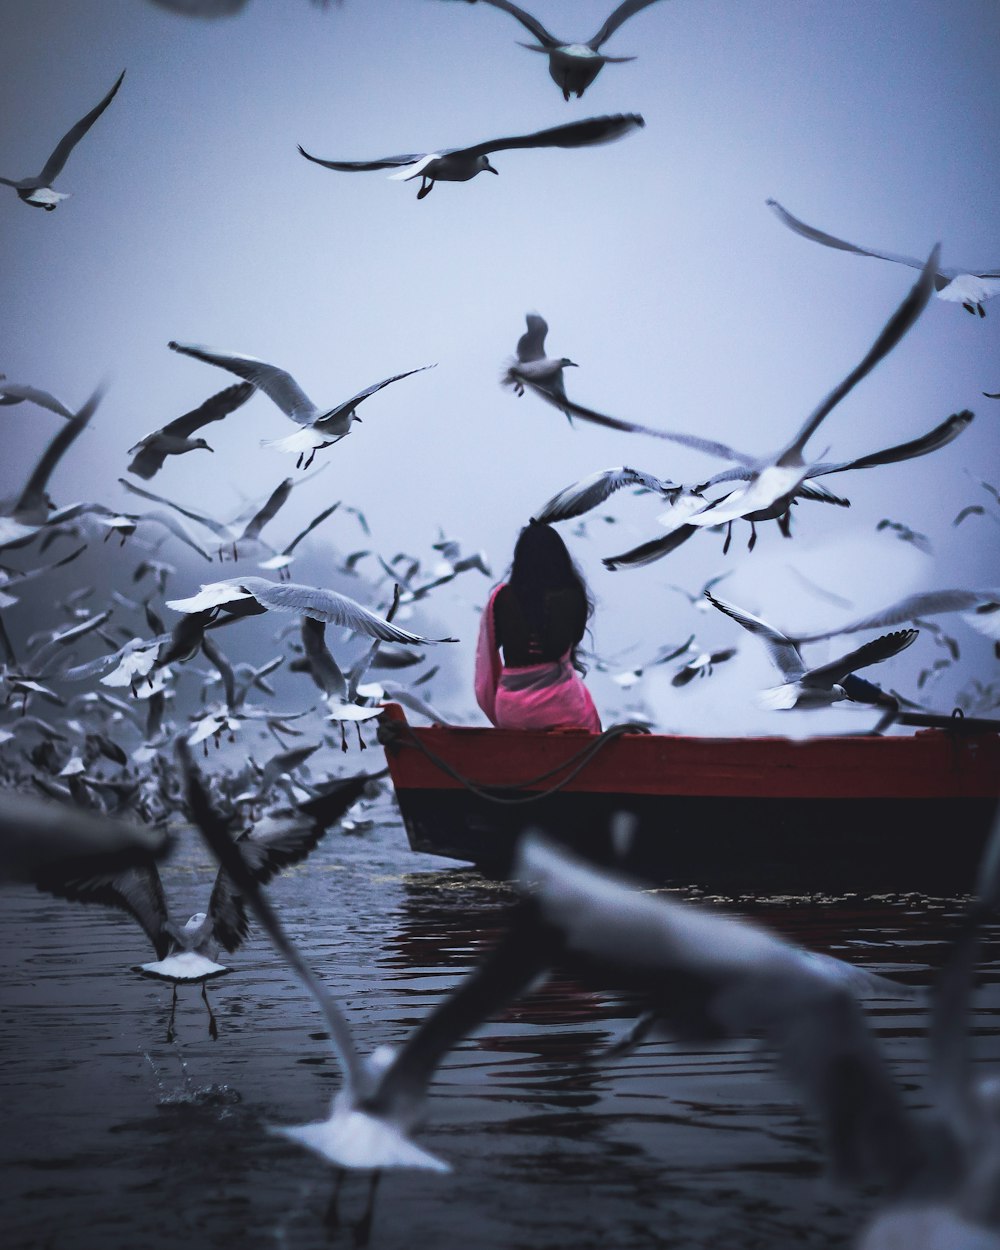 a woman in a boat surrounded by seagulls